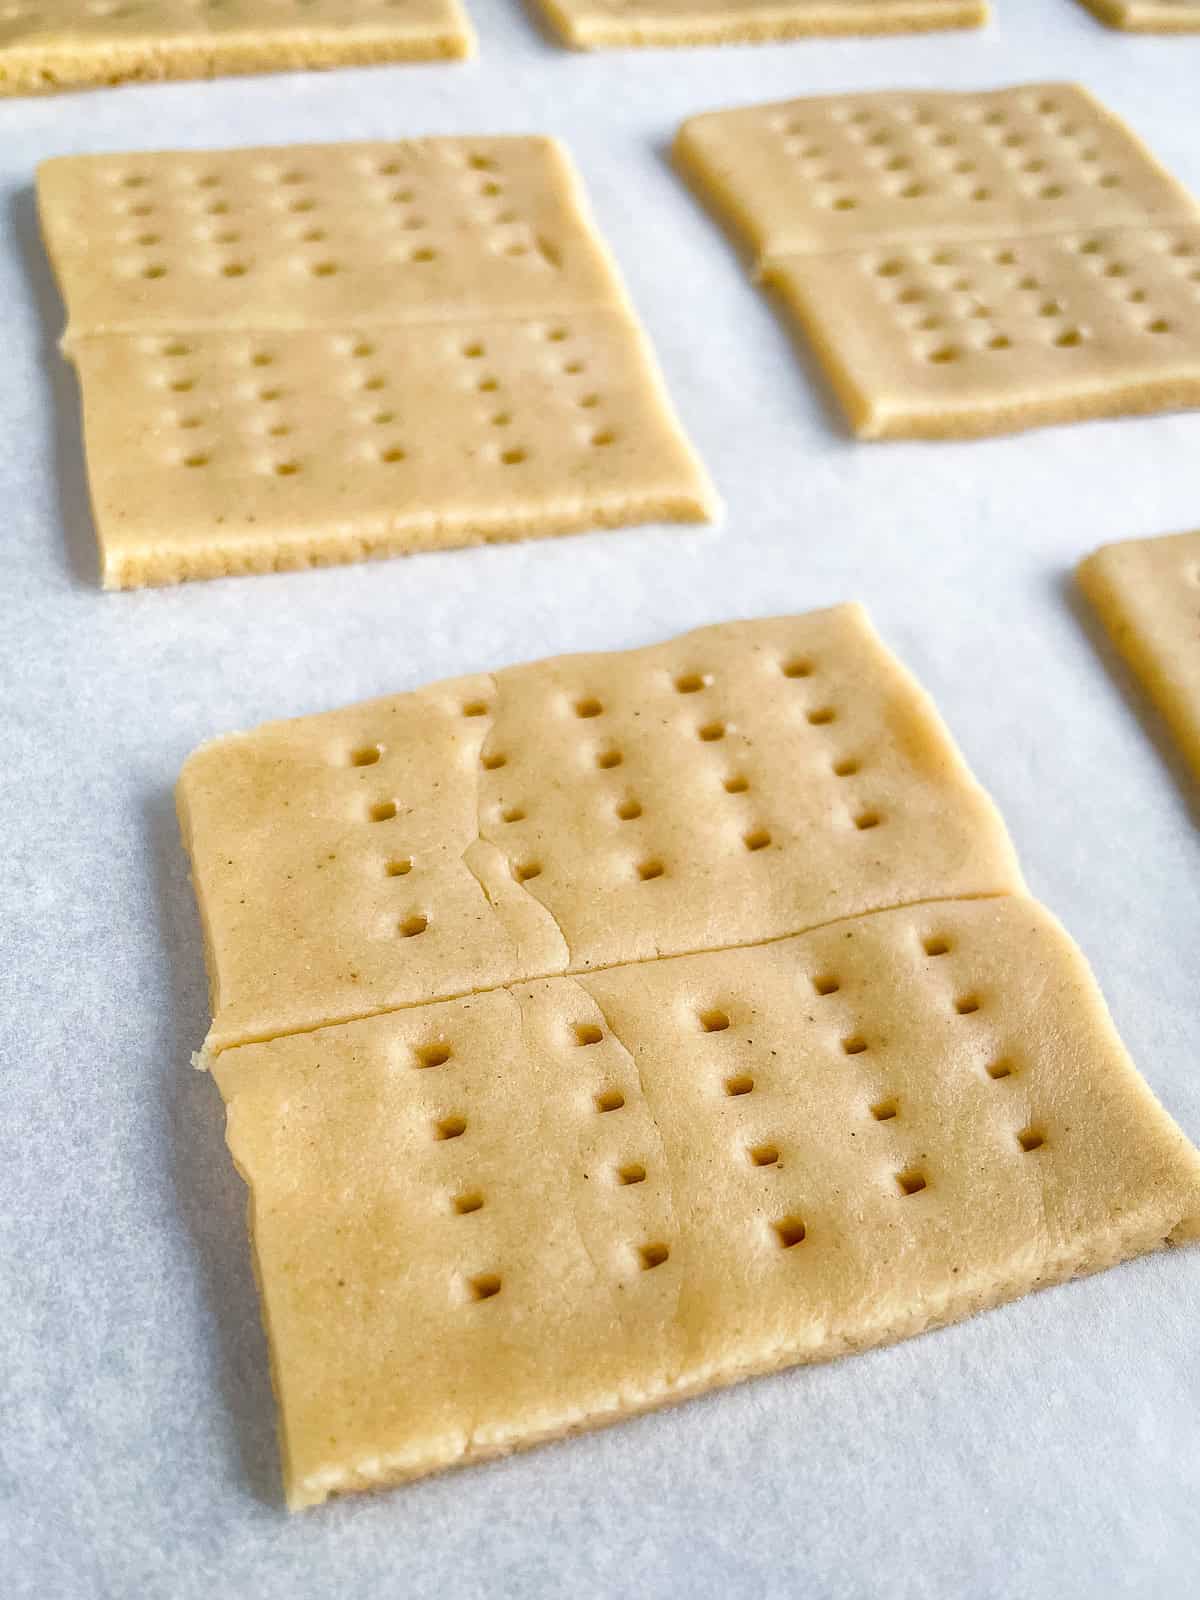 Gluten-free graham cracker dough square, dotted with holes, on a baking sheet.